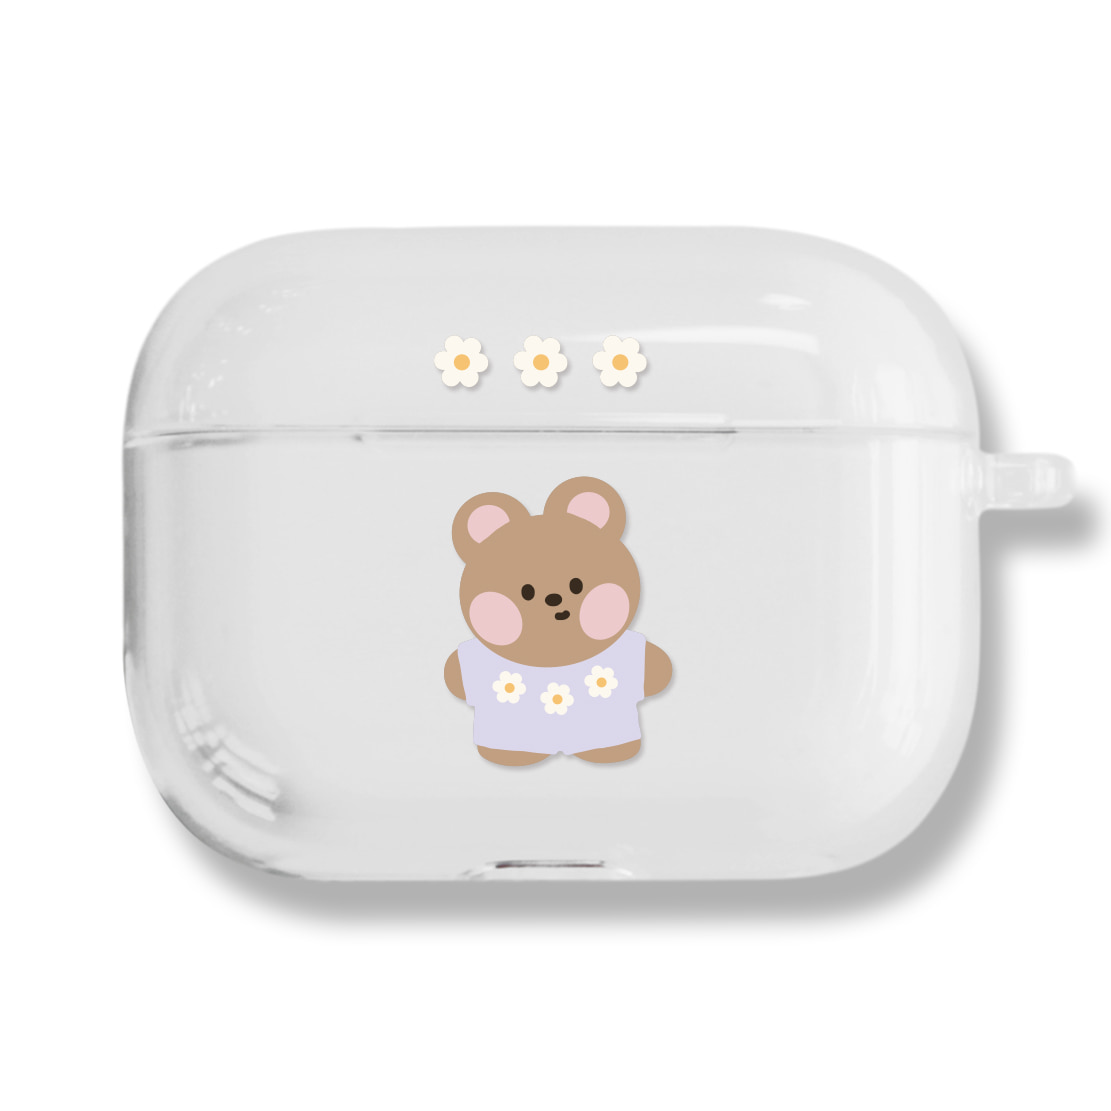 [CLEAR AIRPODS PRO] E-009 곰팅